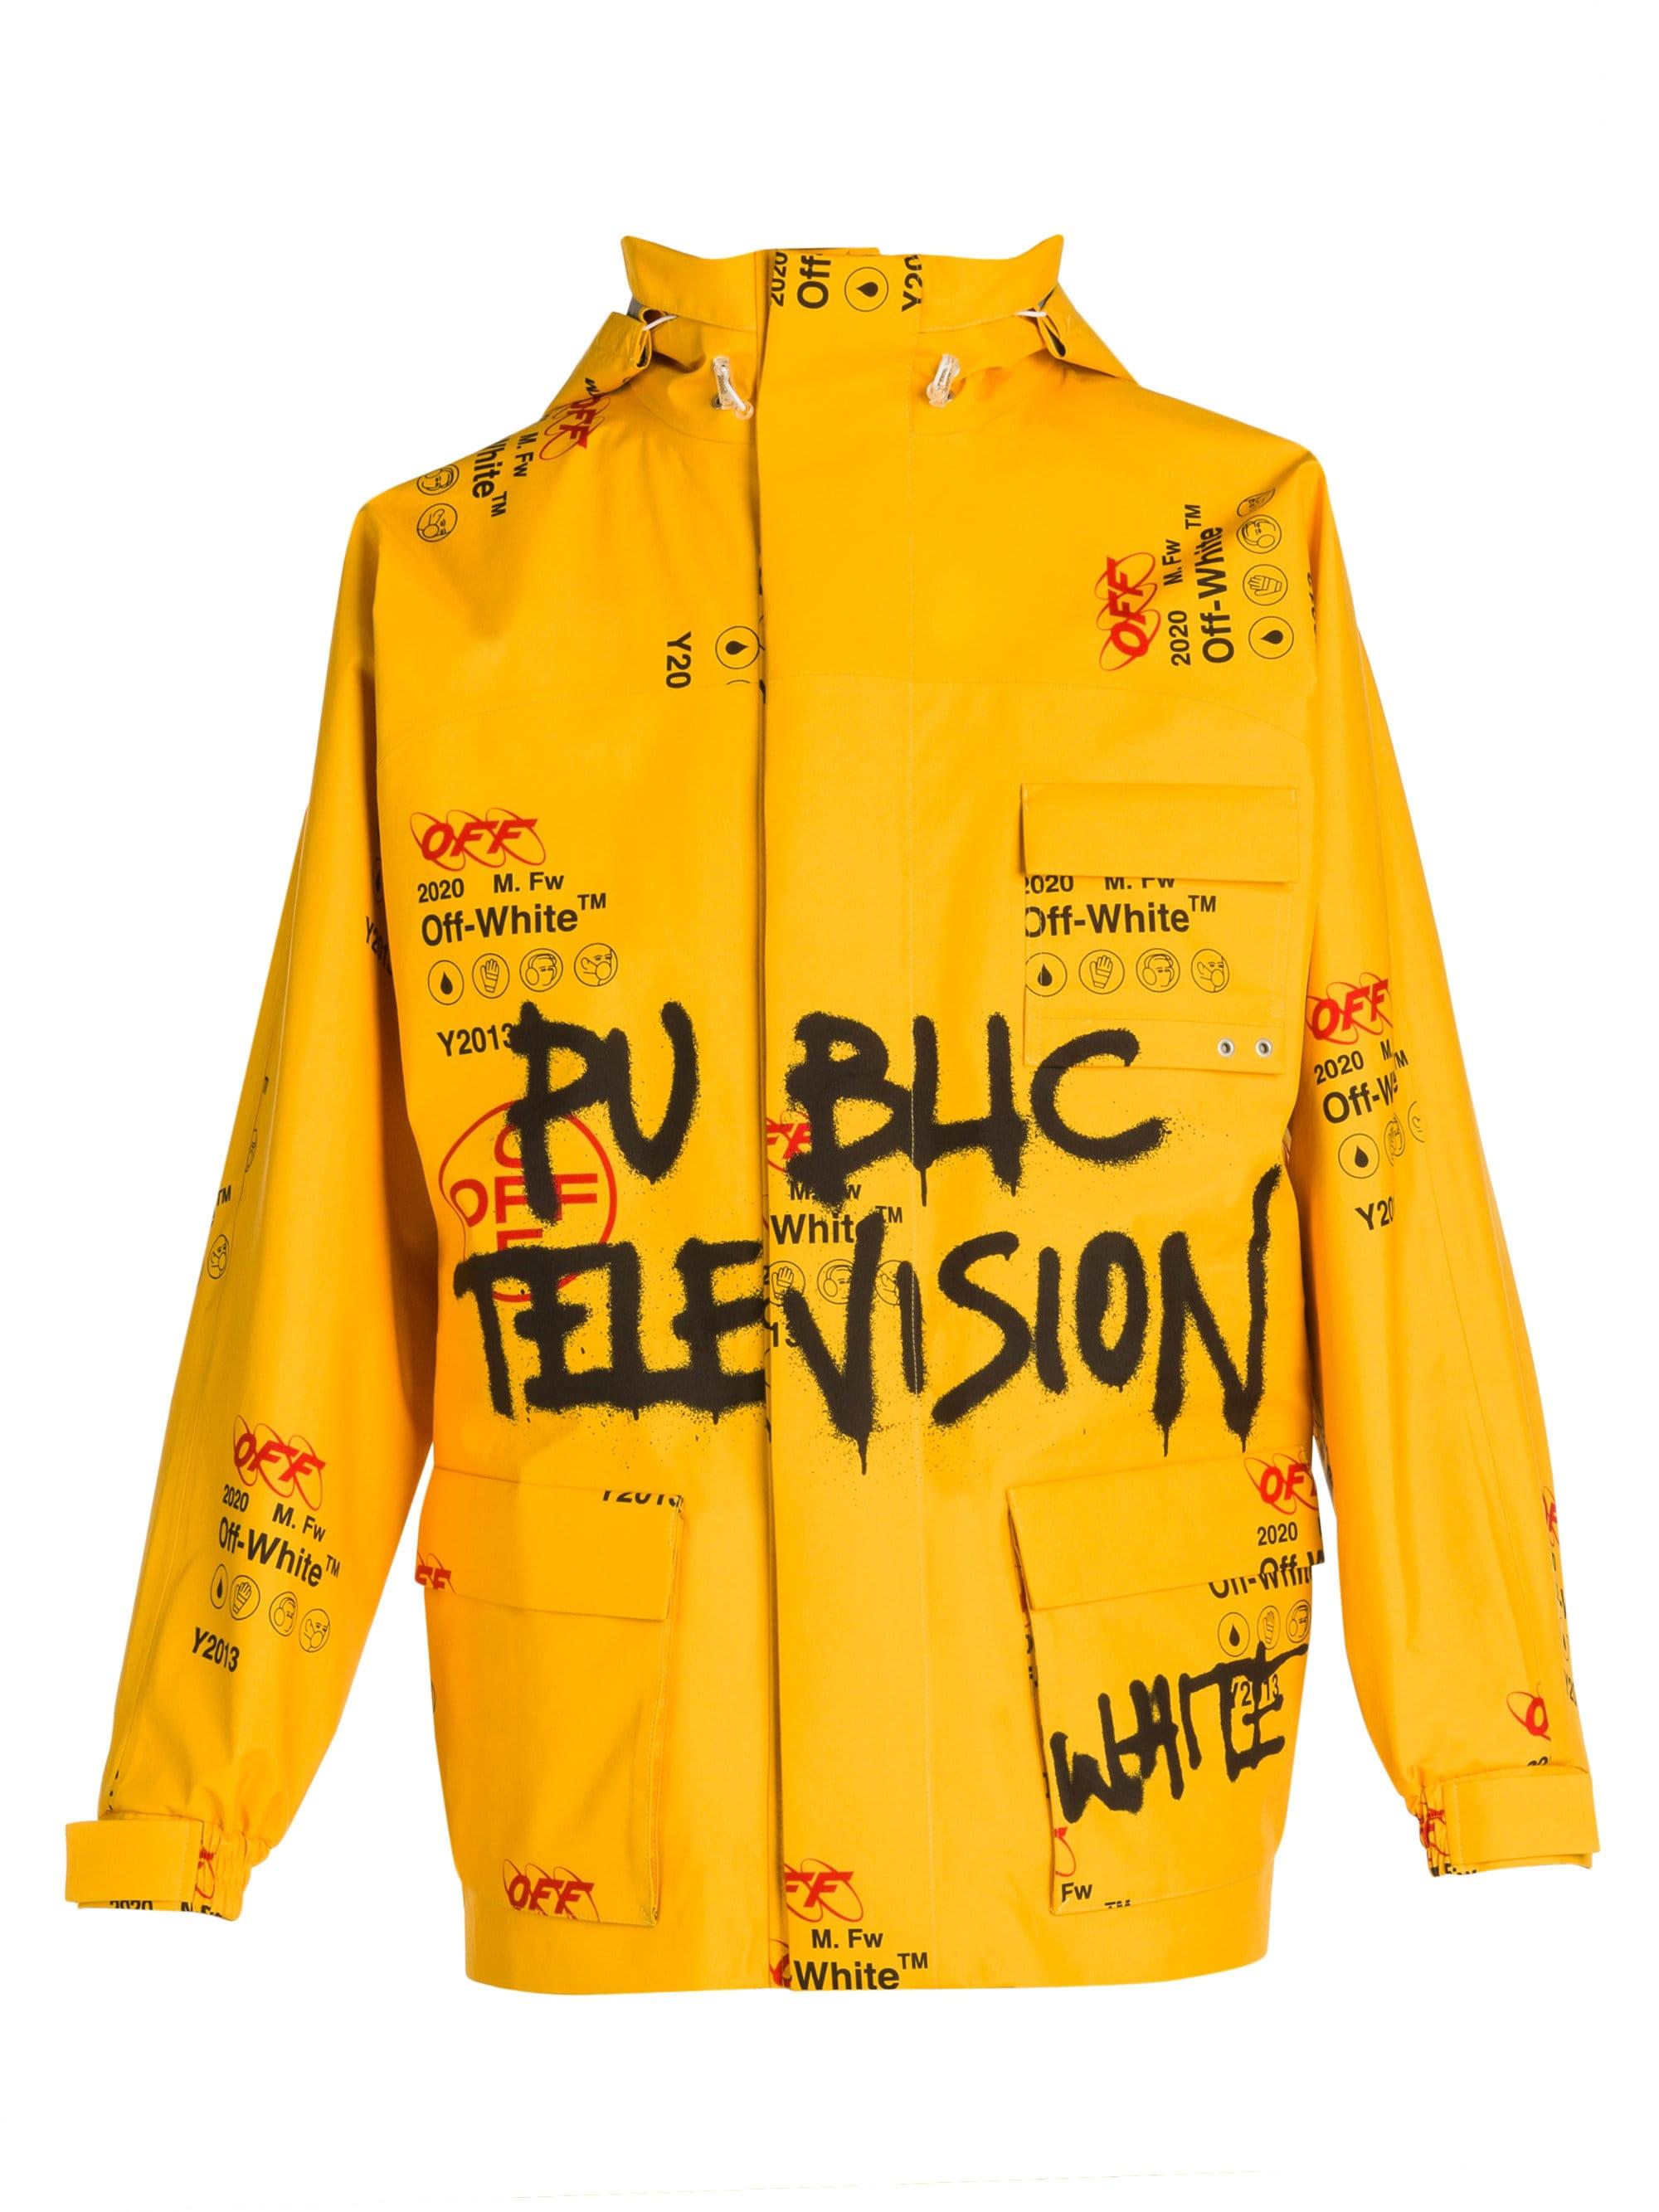 Off-White c/o Virgil Abloh Gore-tex Public Television Ski Jacket in Yellow for Men - Lyst